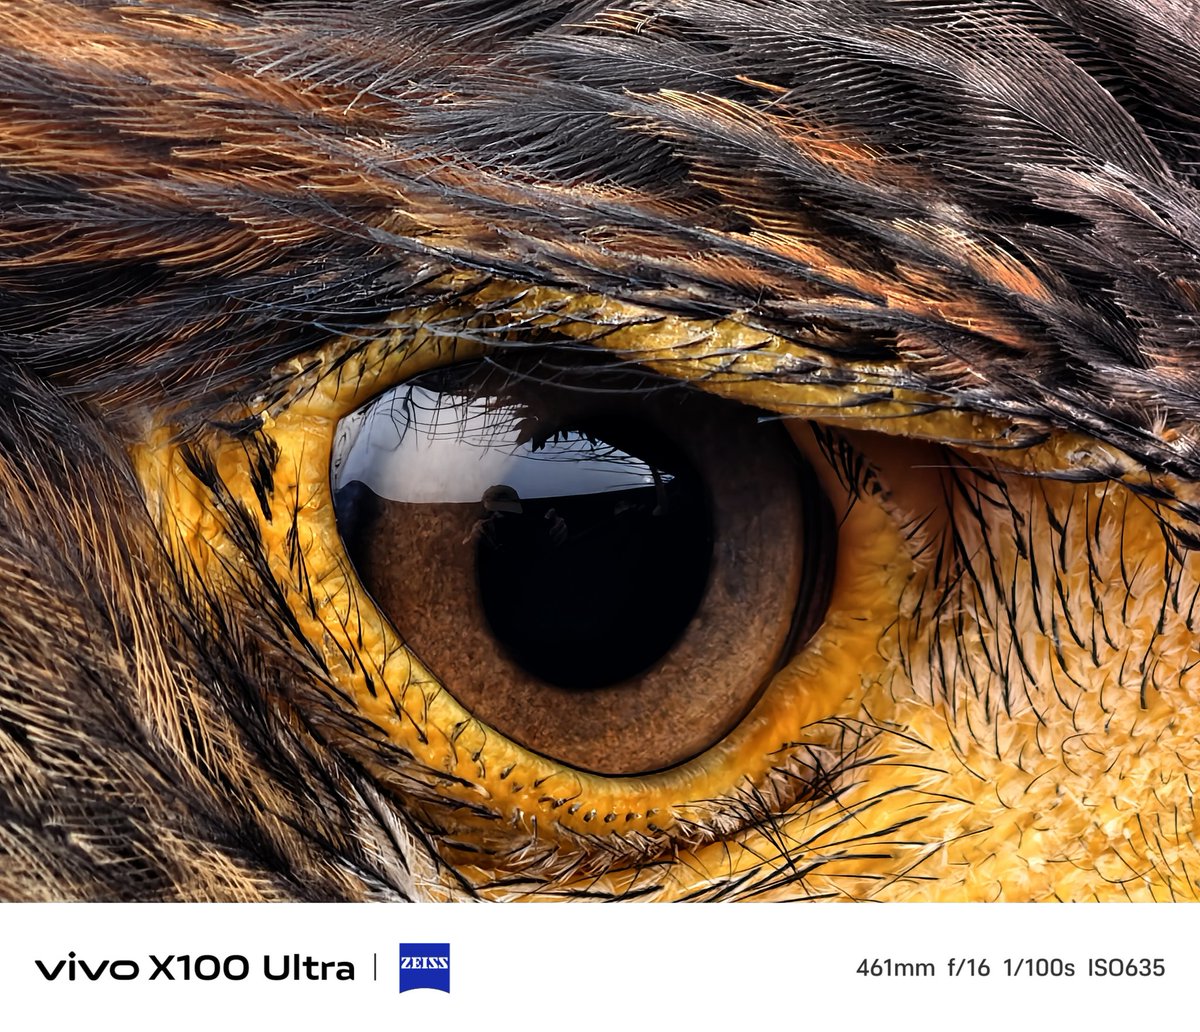 VIVO X100 Ultra Camera Results

50MP LYT900 1/0.98' OIS + CIPA 4.5 Gimbal Stabilization

200MP ISOCELL HP9 1/1.4' Ultra Periscope Telephoto
50MP SONY LYT600 1/1.95' Ultra-wide

Coupled with Blue Image, Zeiss T* & VIVO V3+ ISP Chip Imaging (6nm TSMC)